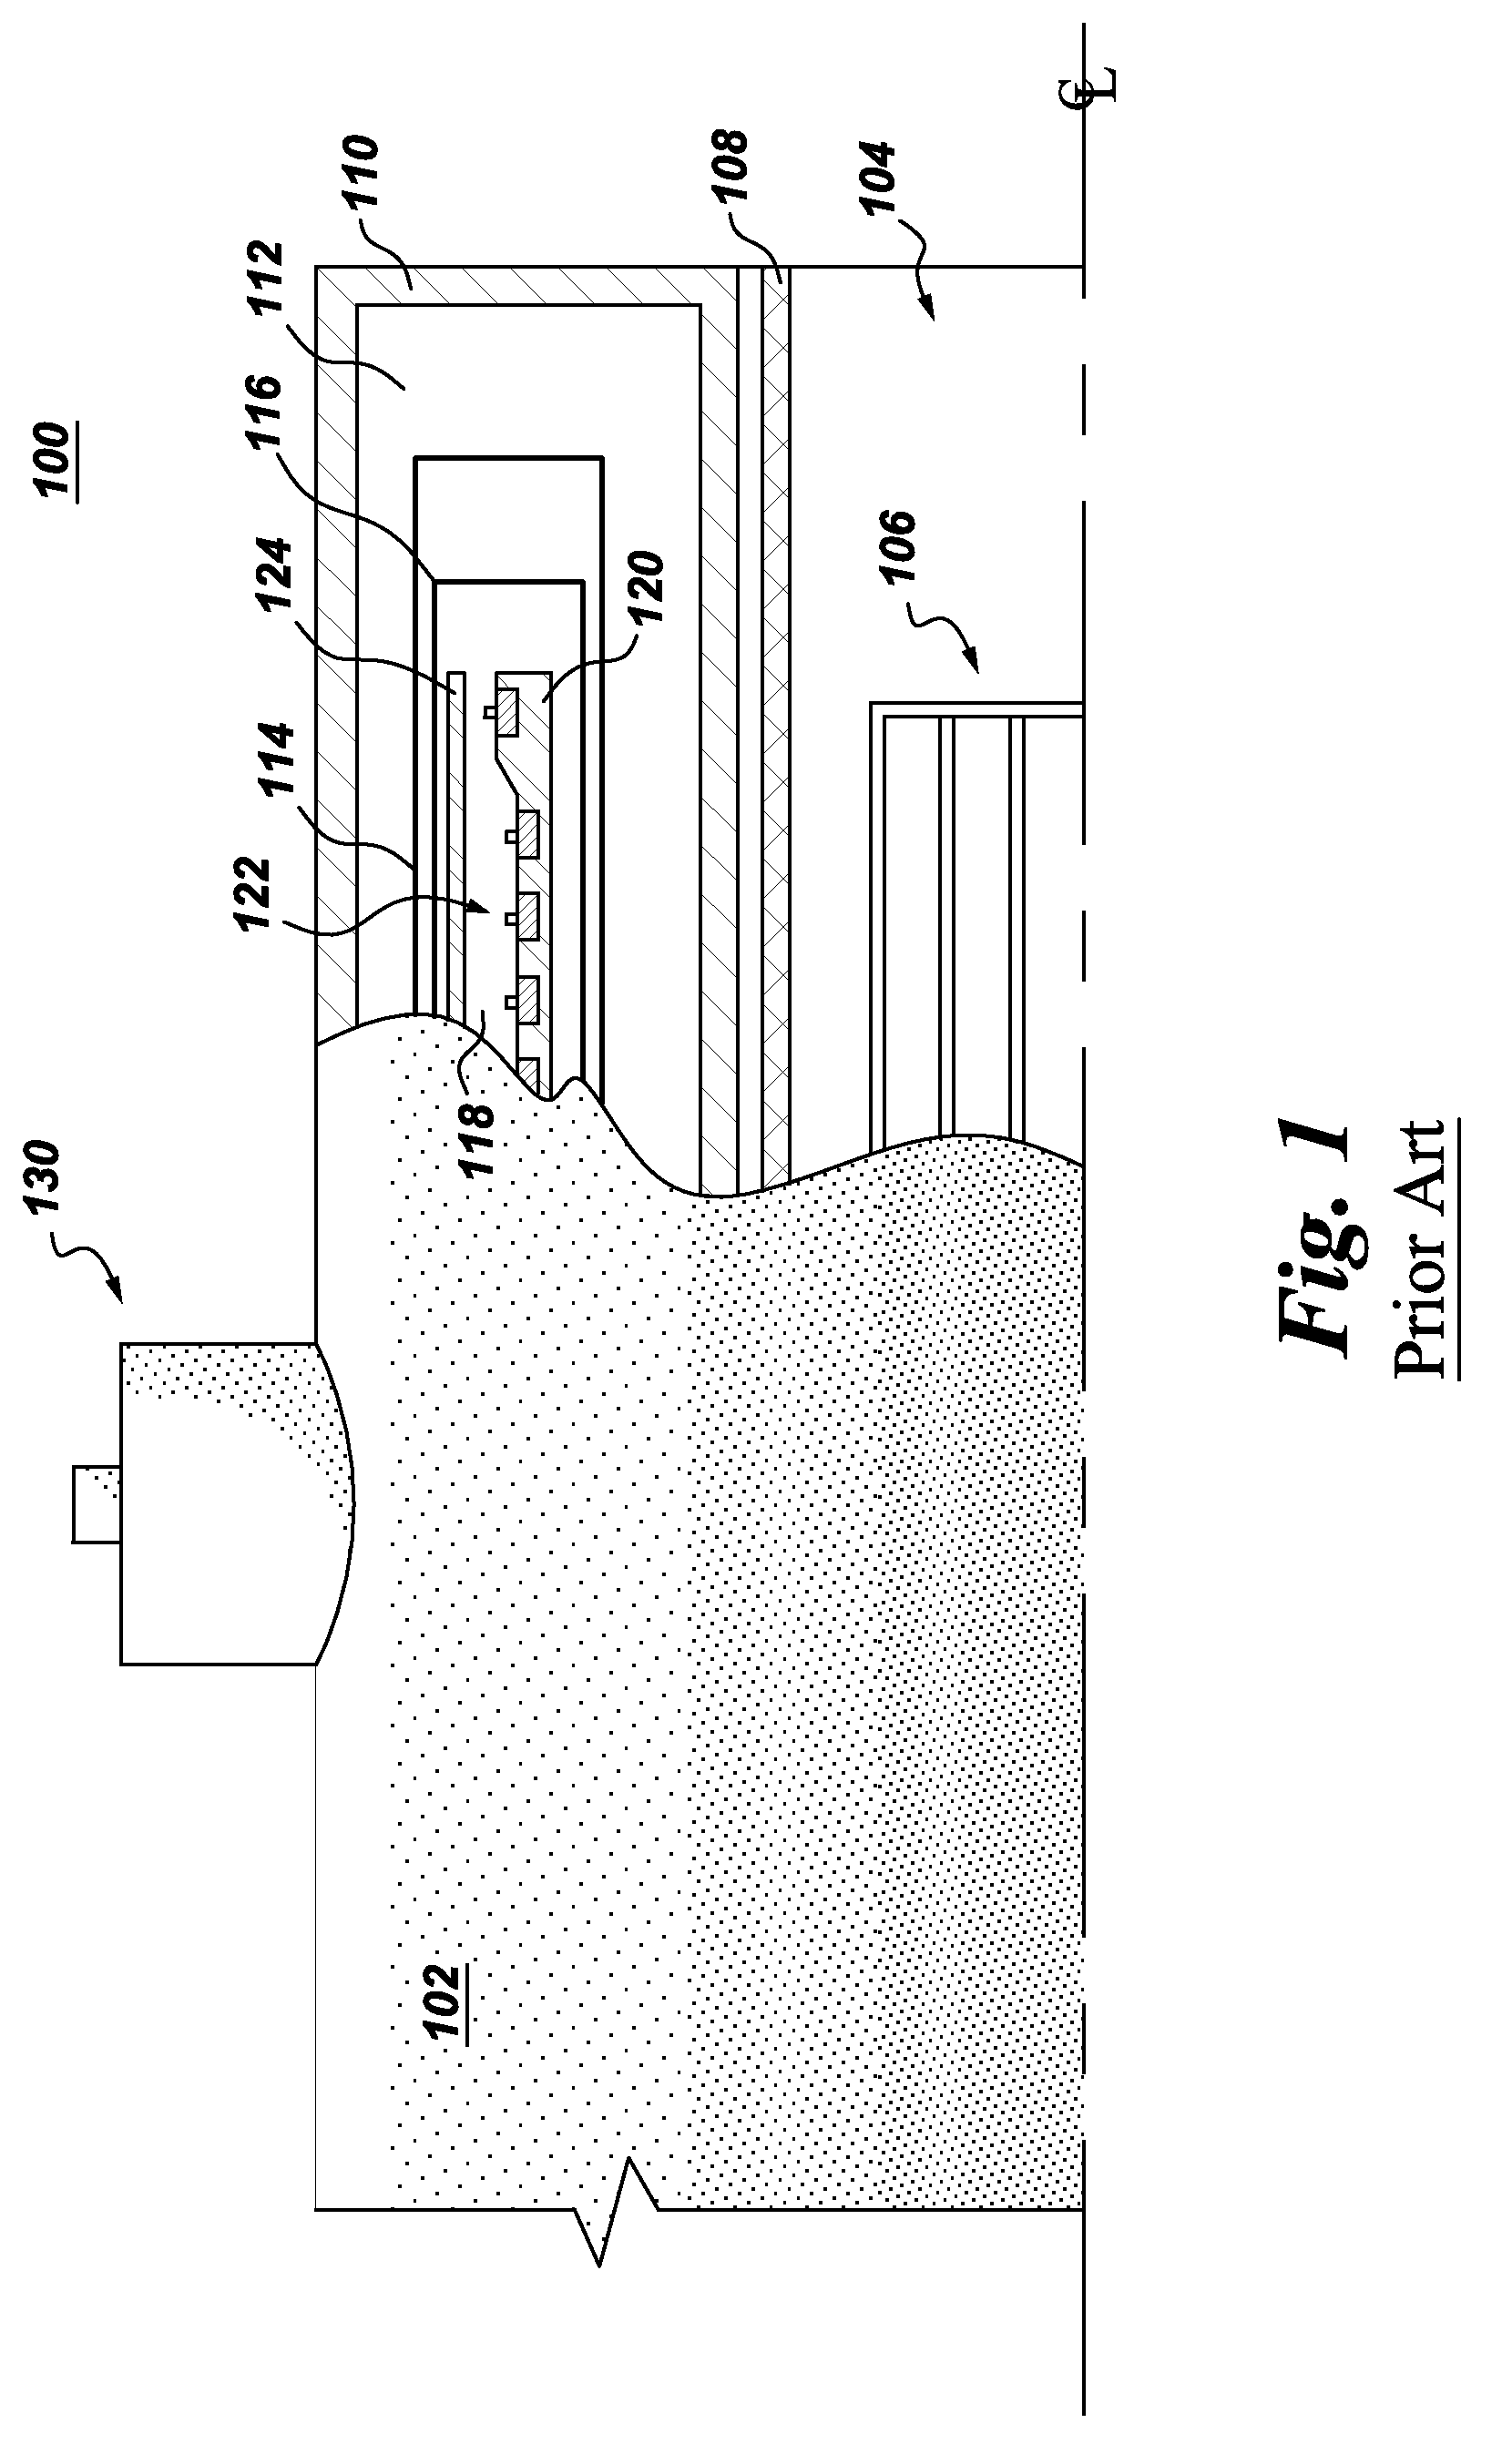 Apparatus and method for cooling a superconducting magnetic assembly